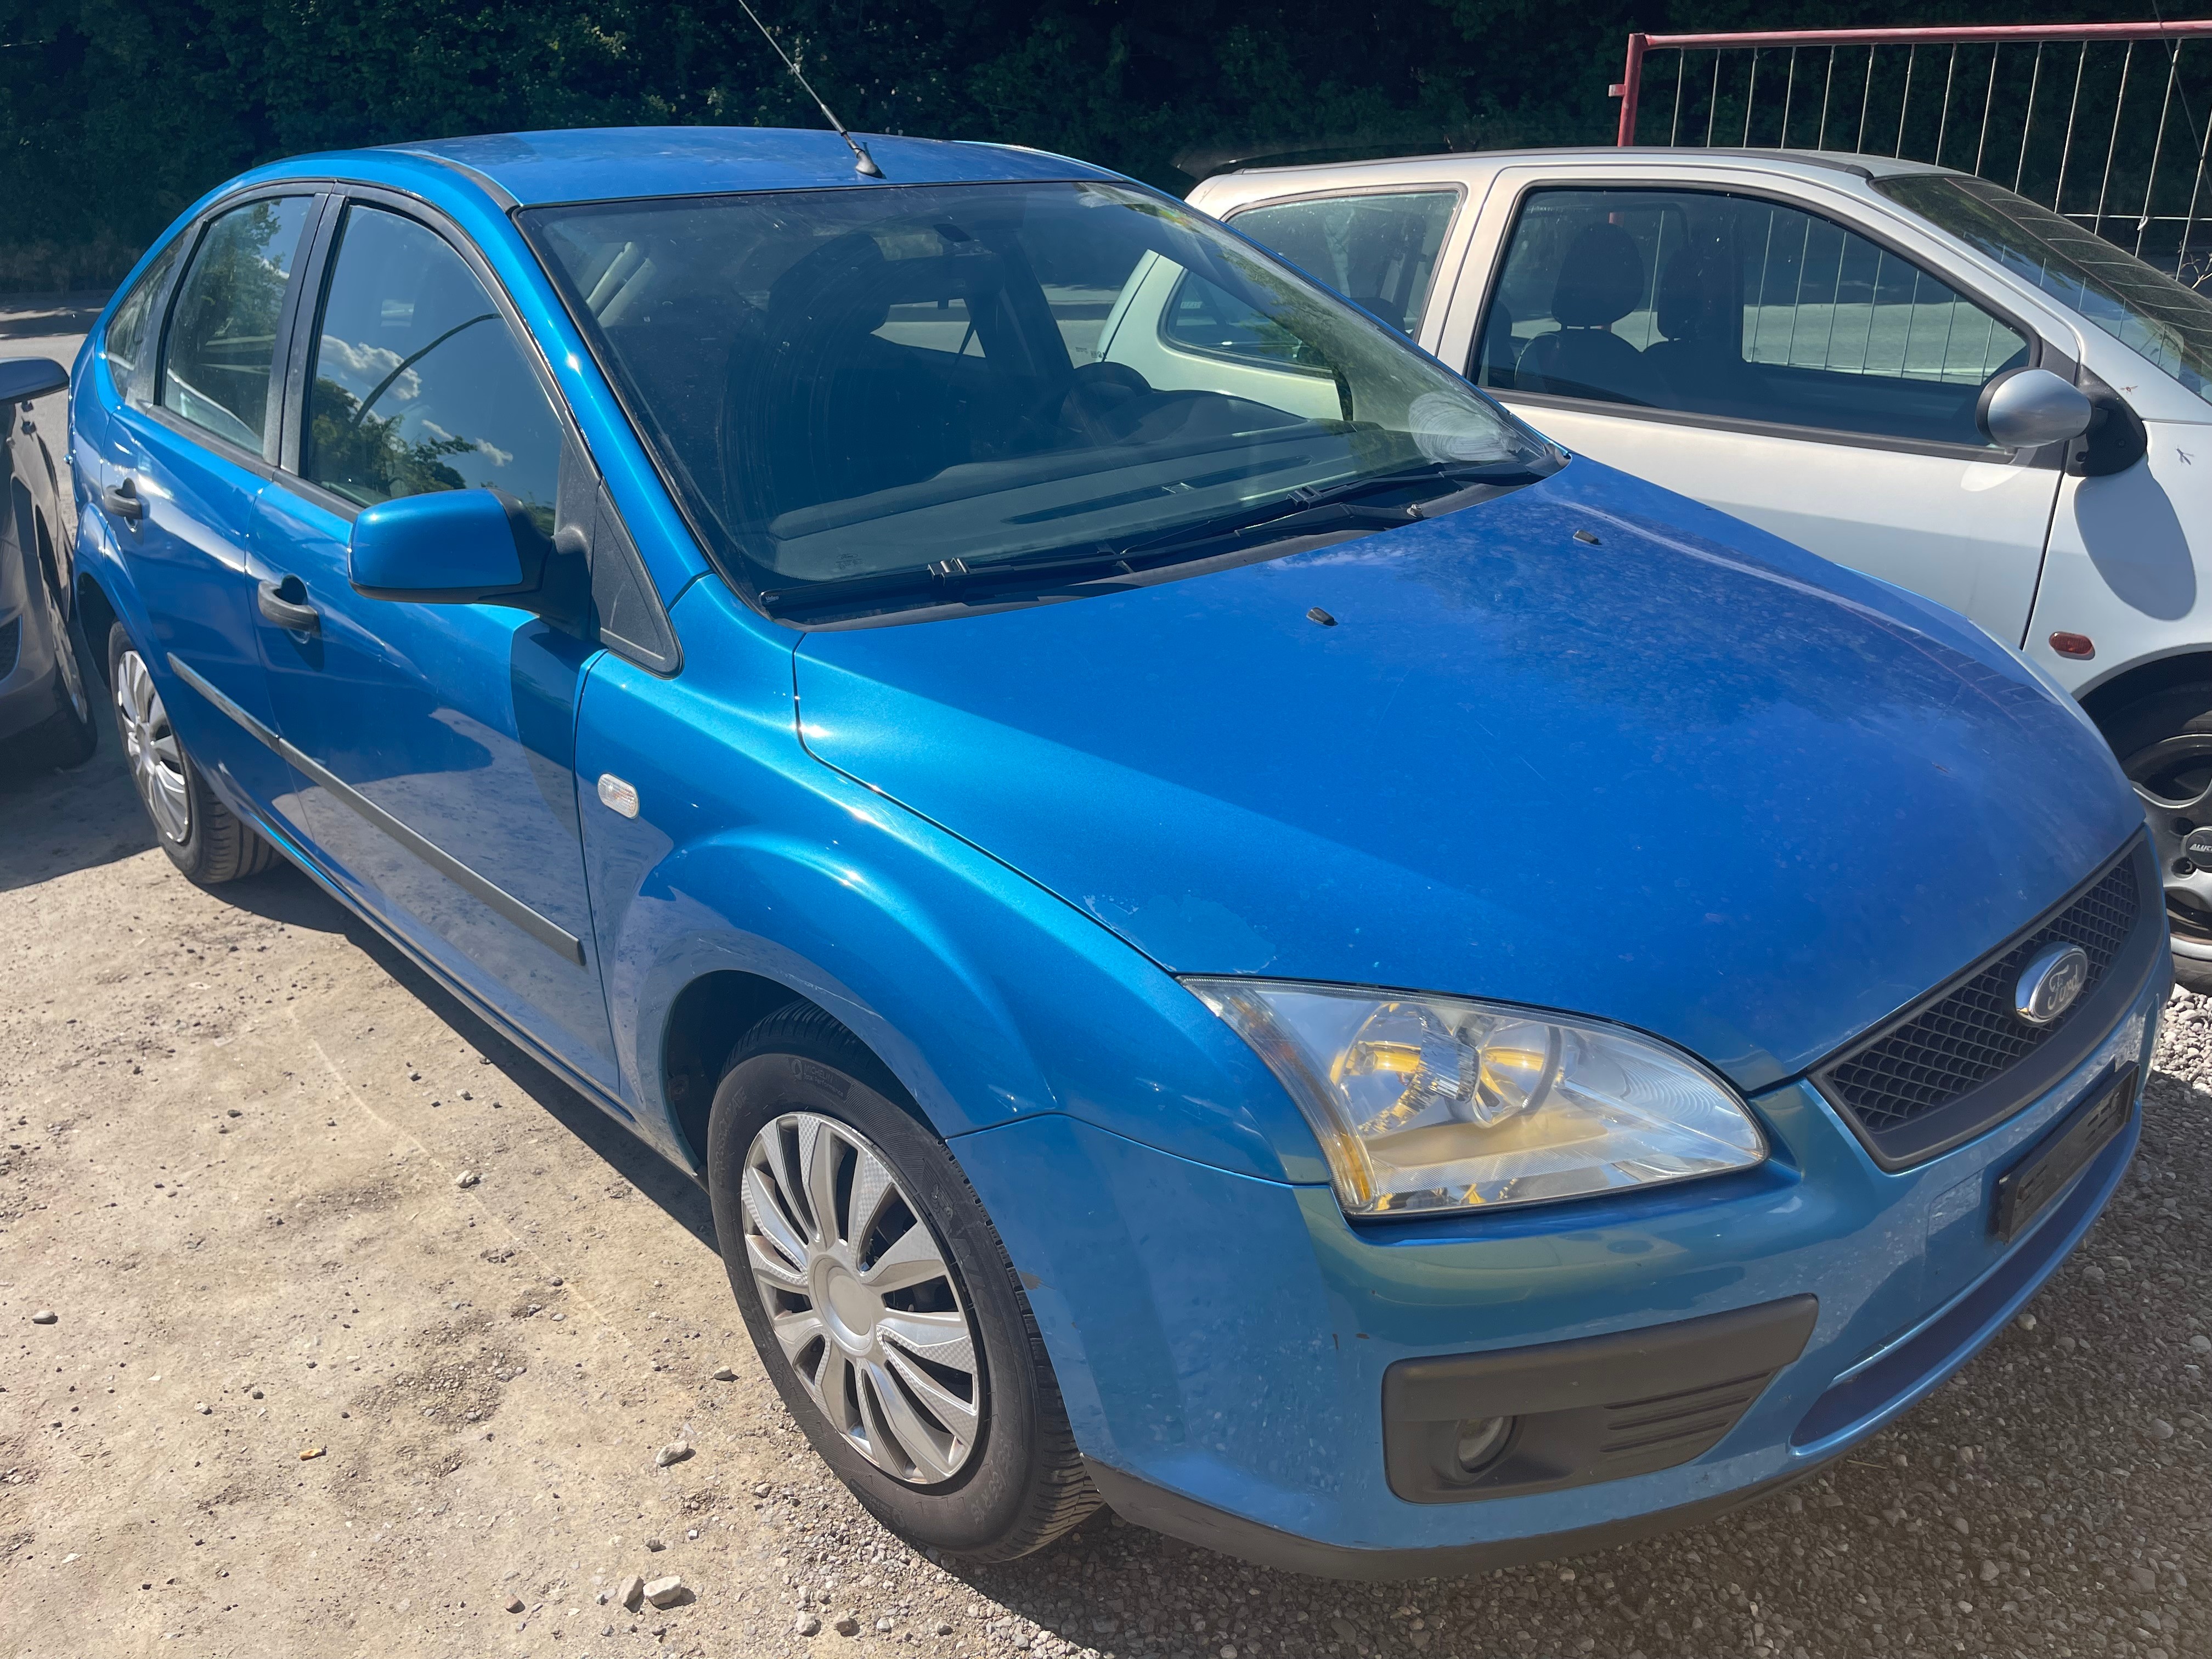 FORD Focus 1.6i Carving Automatic